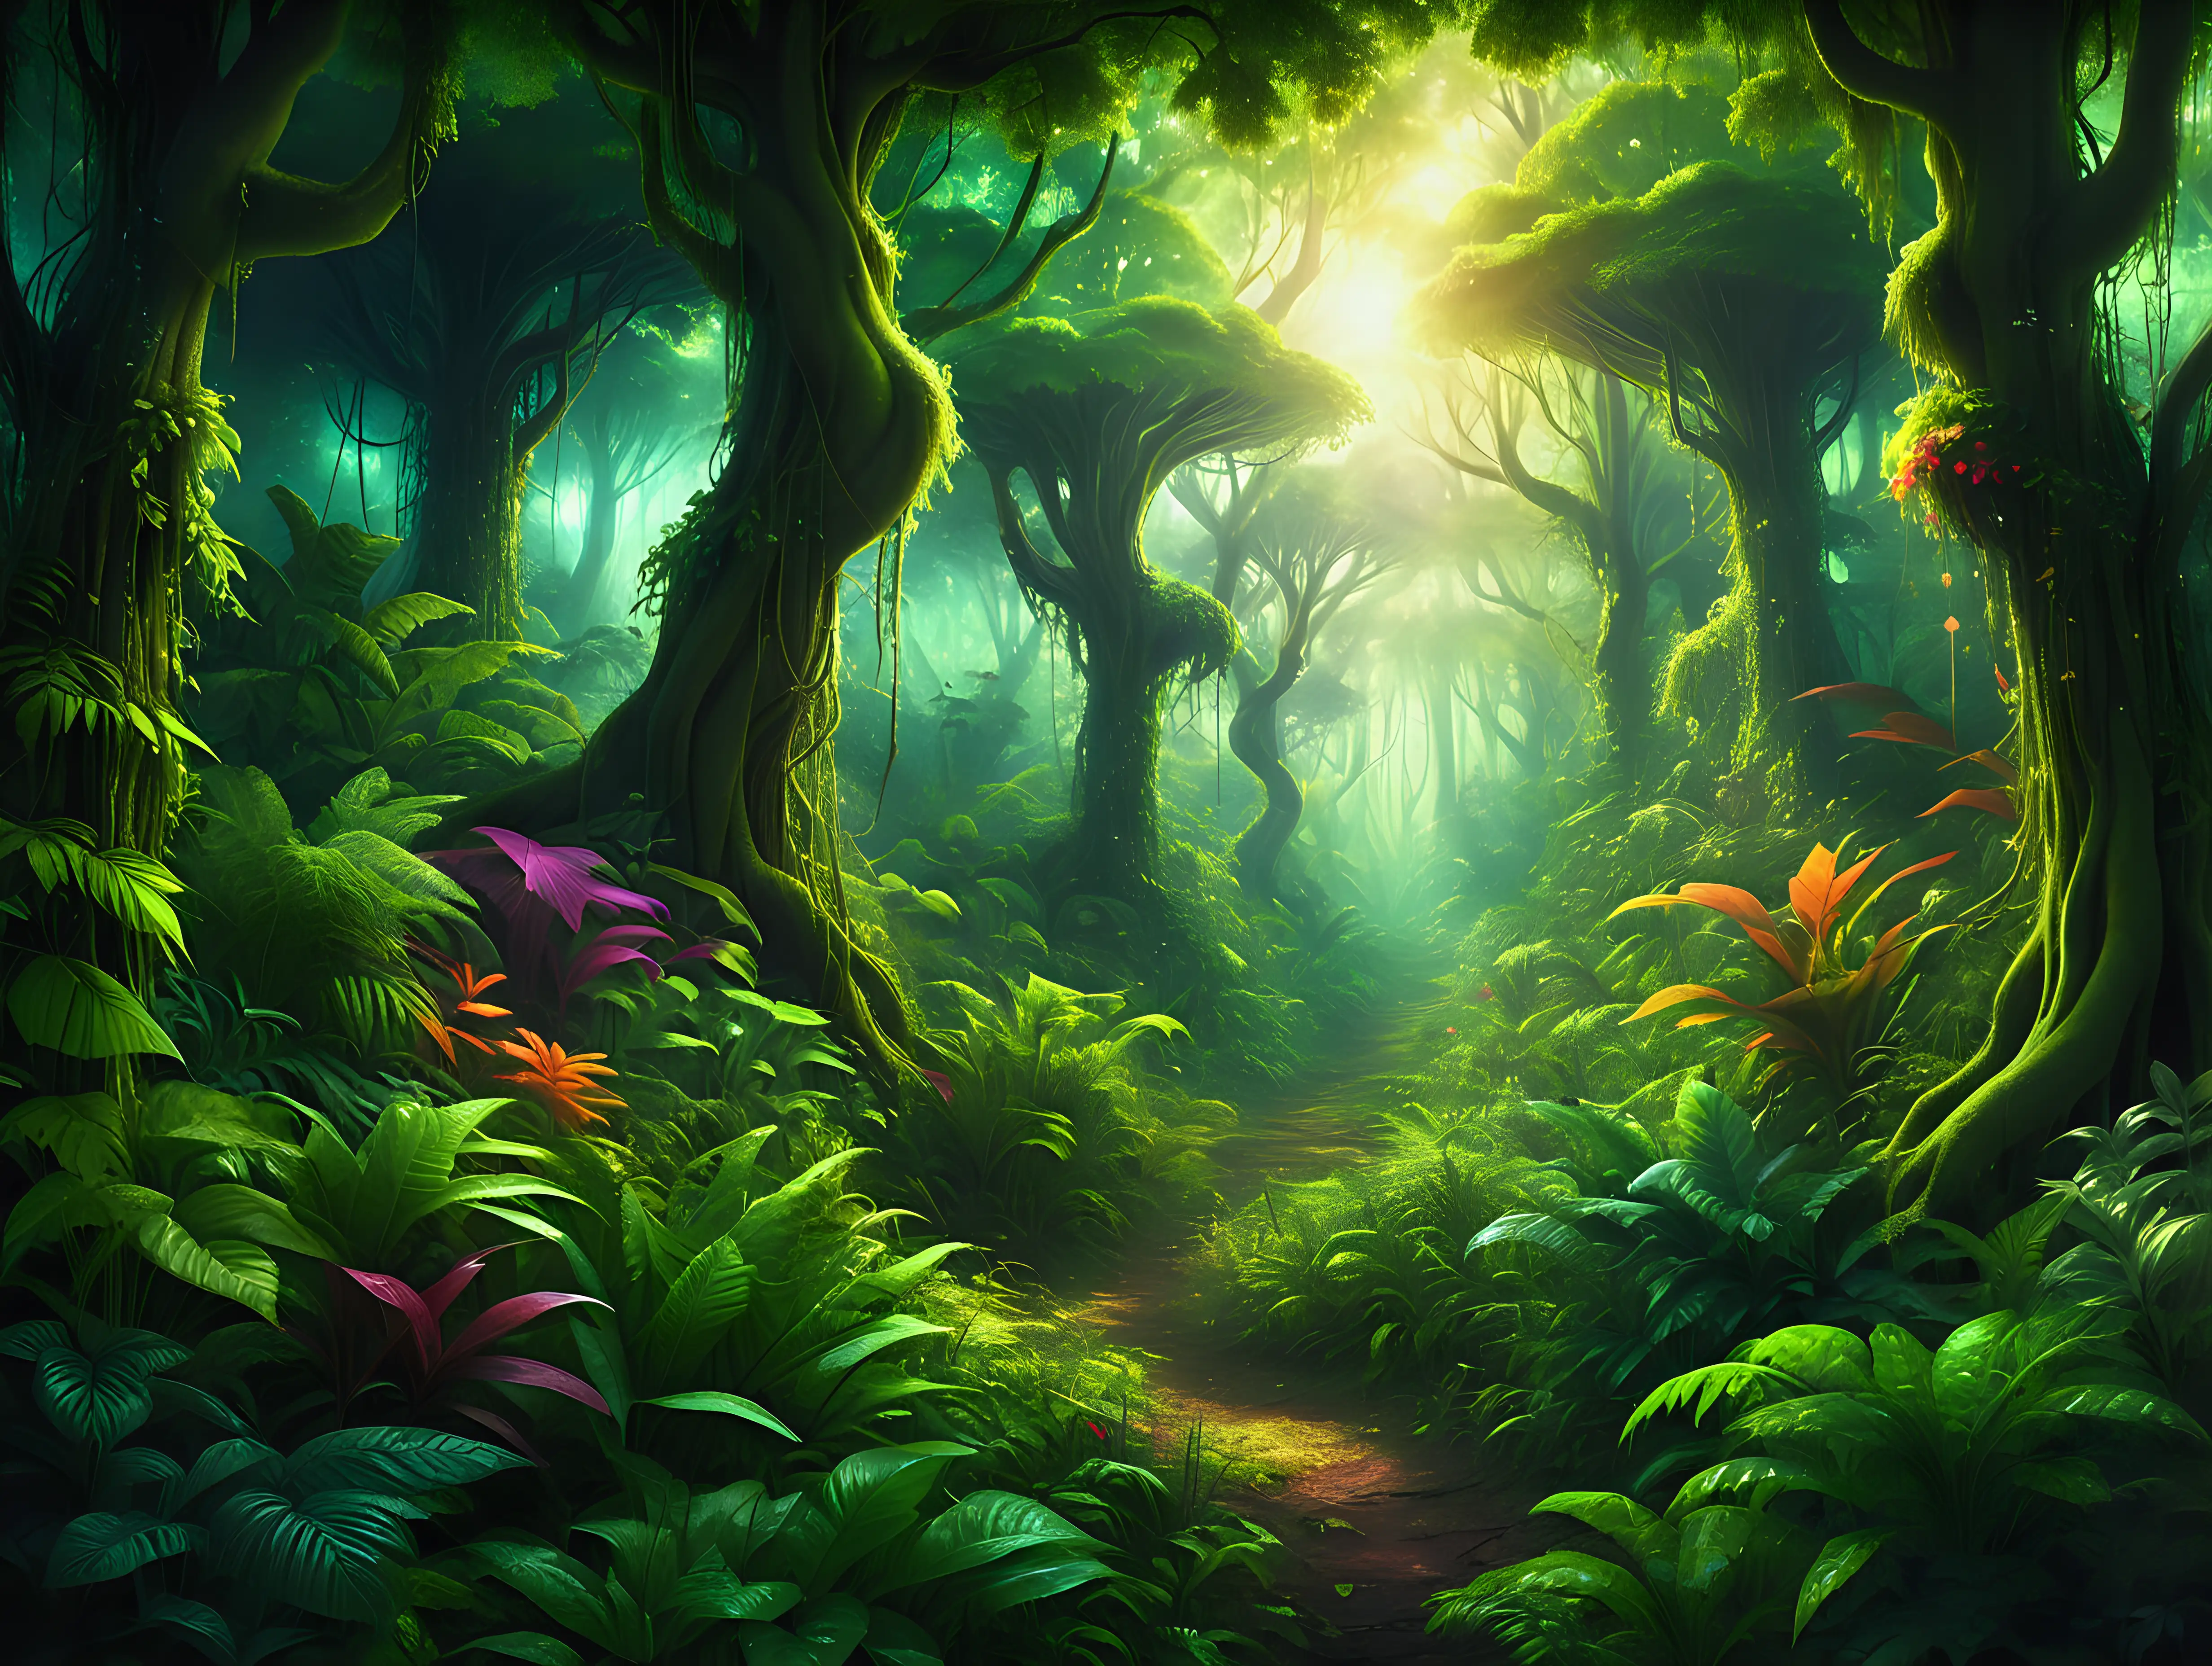 This image depicts a lush, green and vibrant forest, full of bright colour. The mystical forest is dense with various types of trees and vegetation, including large, thick vines, and broad-leaved plants. The atmosphere appears enchanted, adding a sense of peace and tranquility to the scene. The lighting suggests that it might be dawn
, creating a serene and enchanting ambiance.
